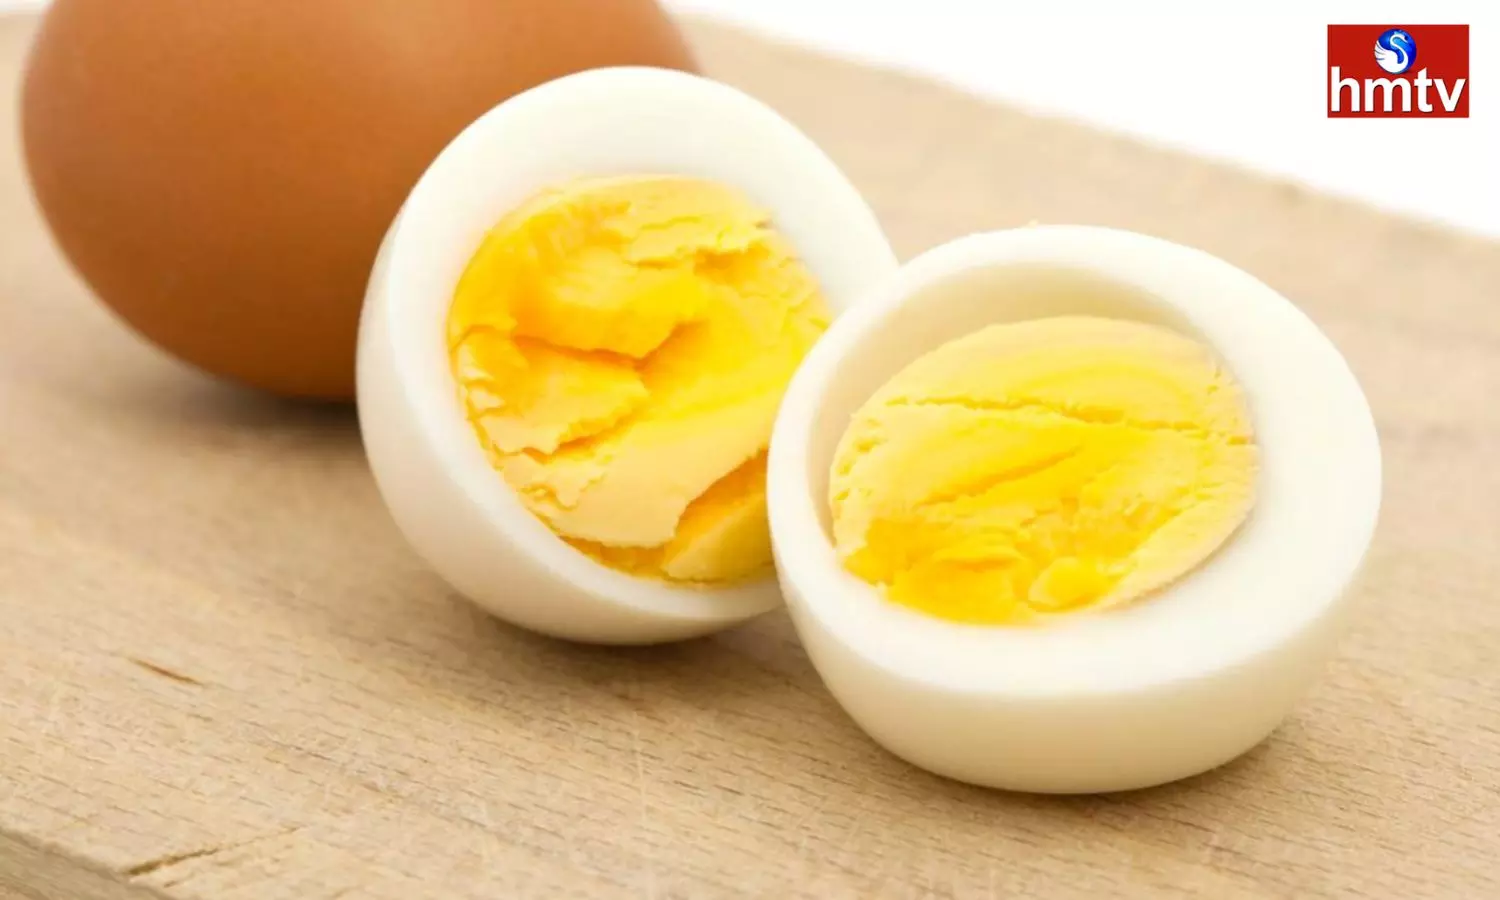 Does eating egg yolk increase fat know what the experts are saying